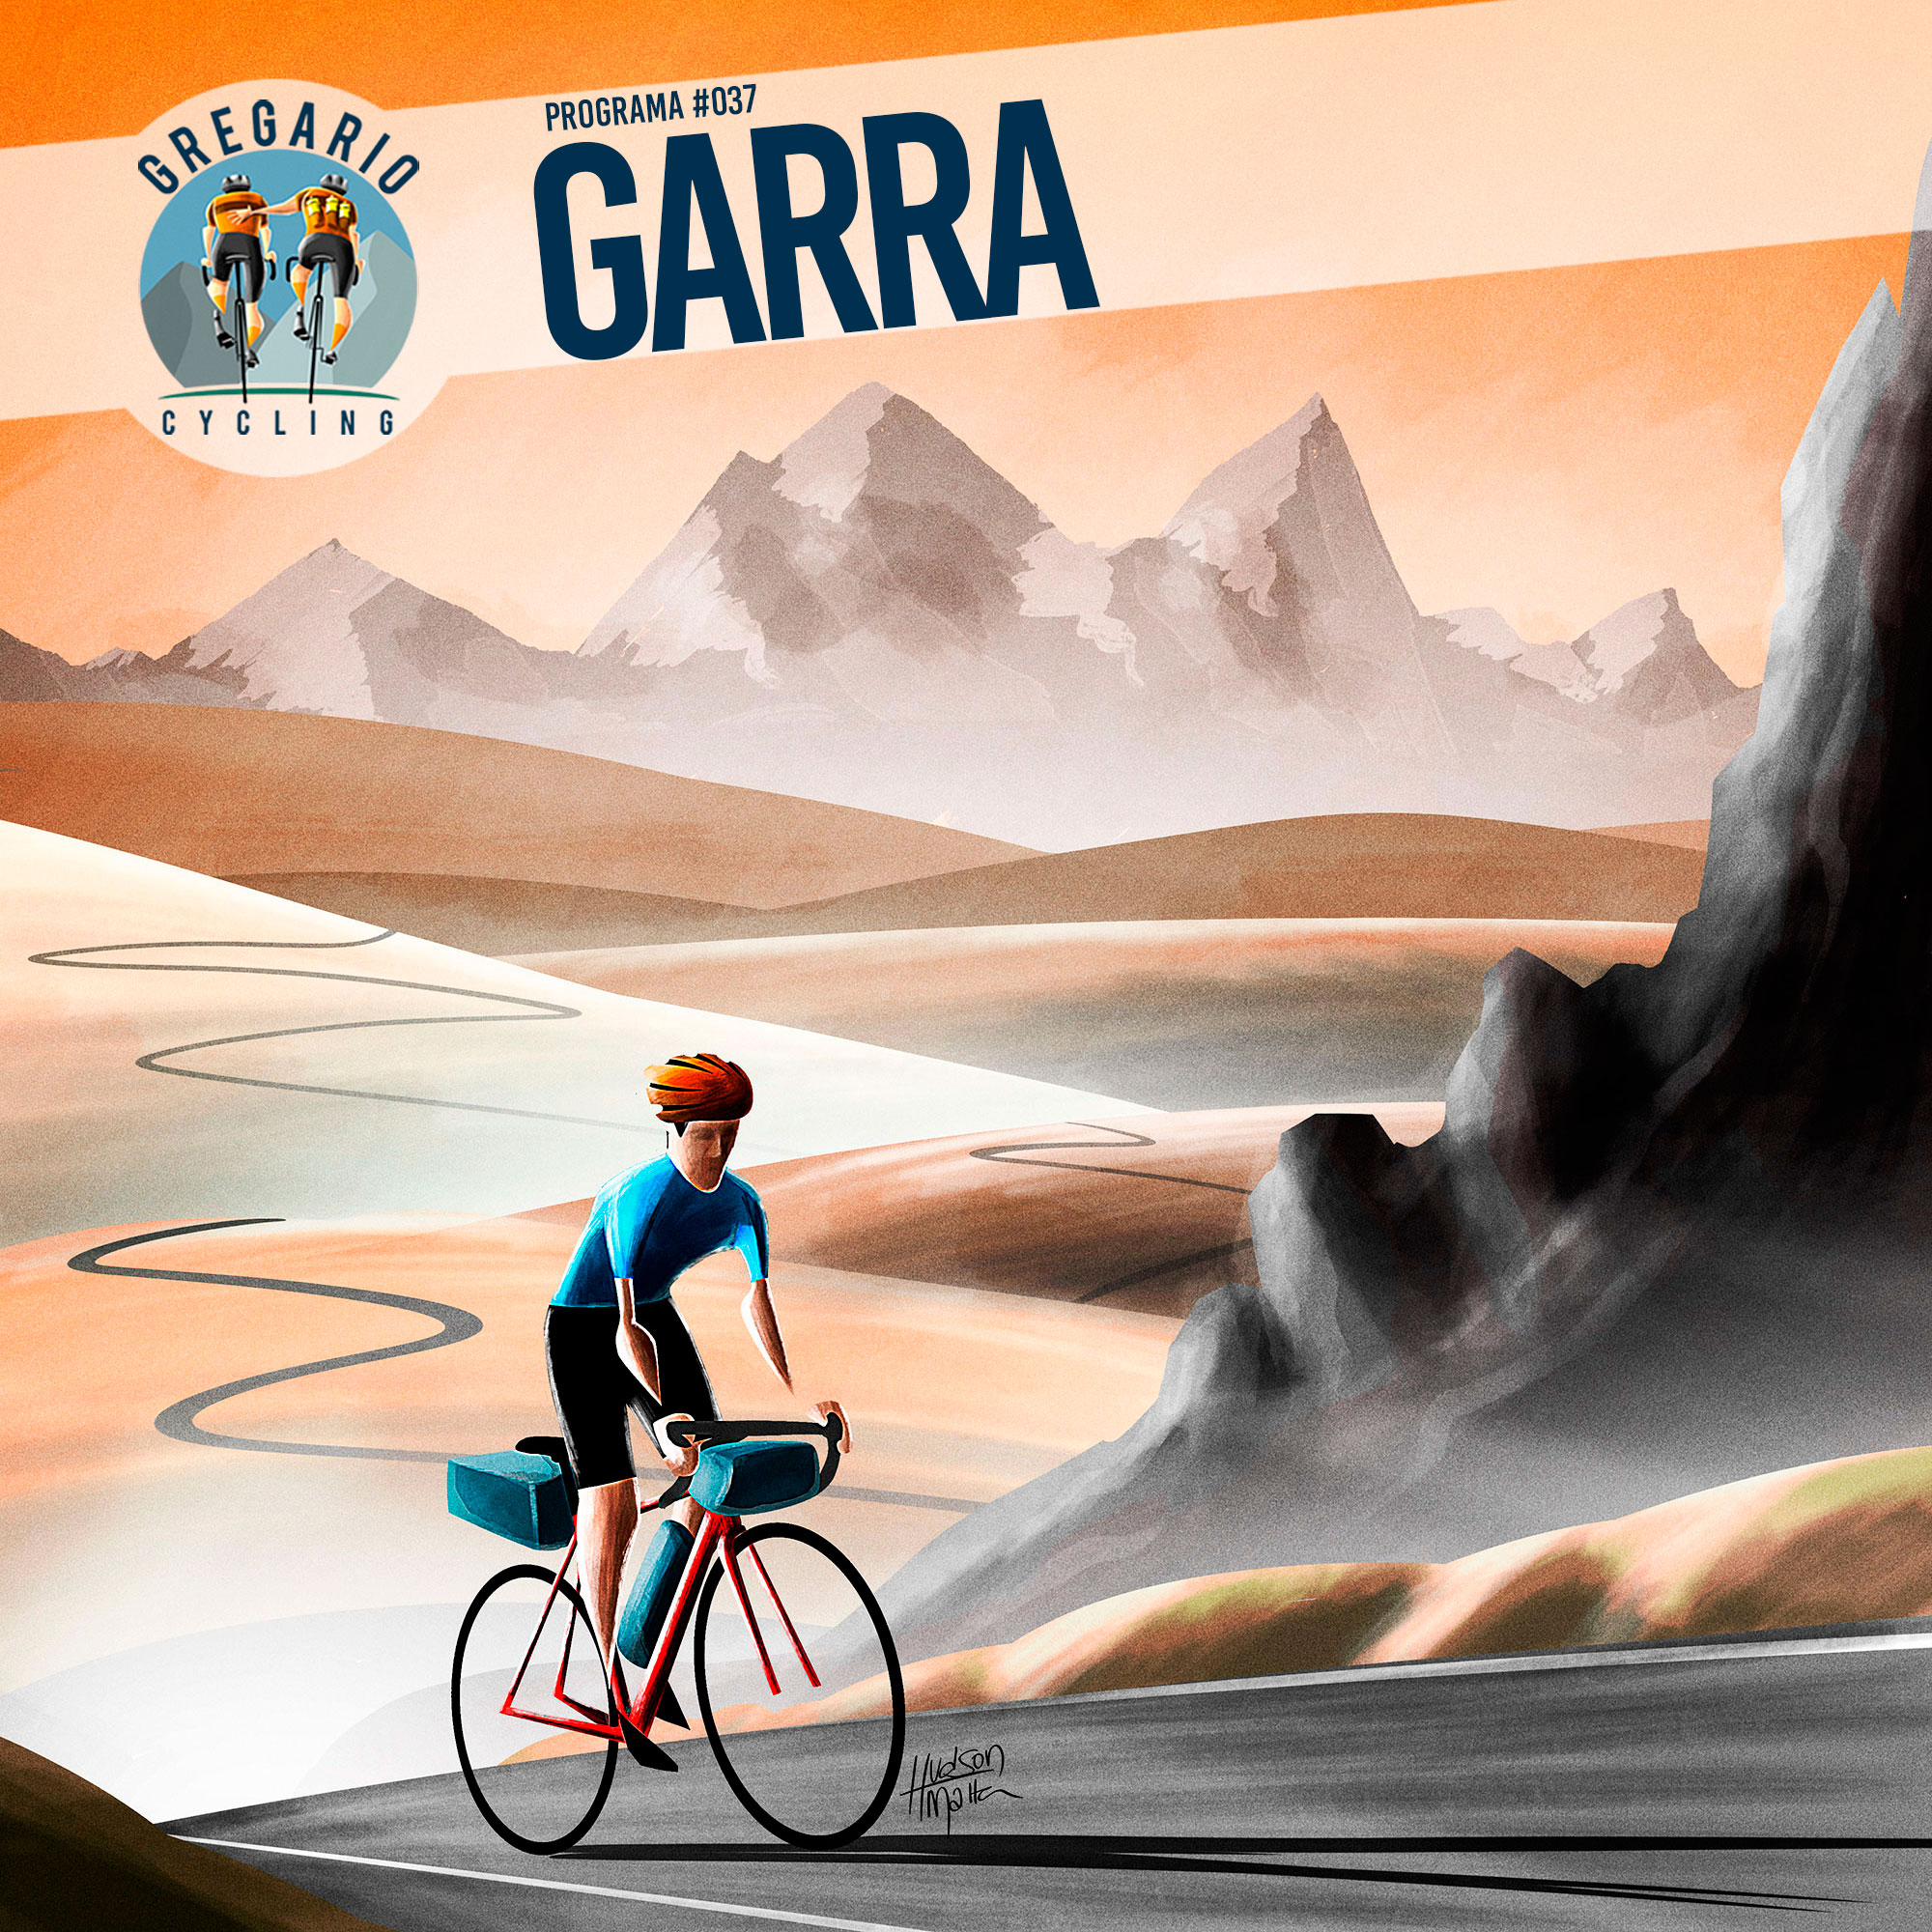 Artwork for podcast Gregario Cycling